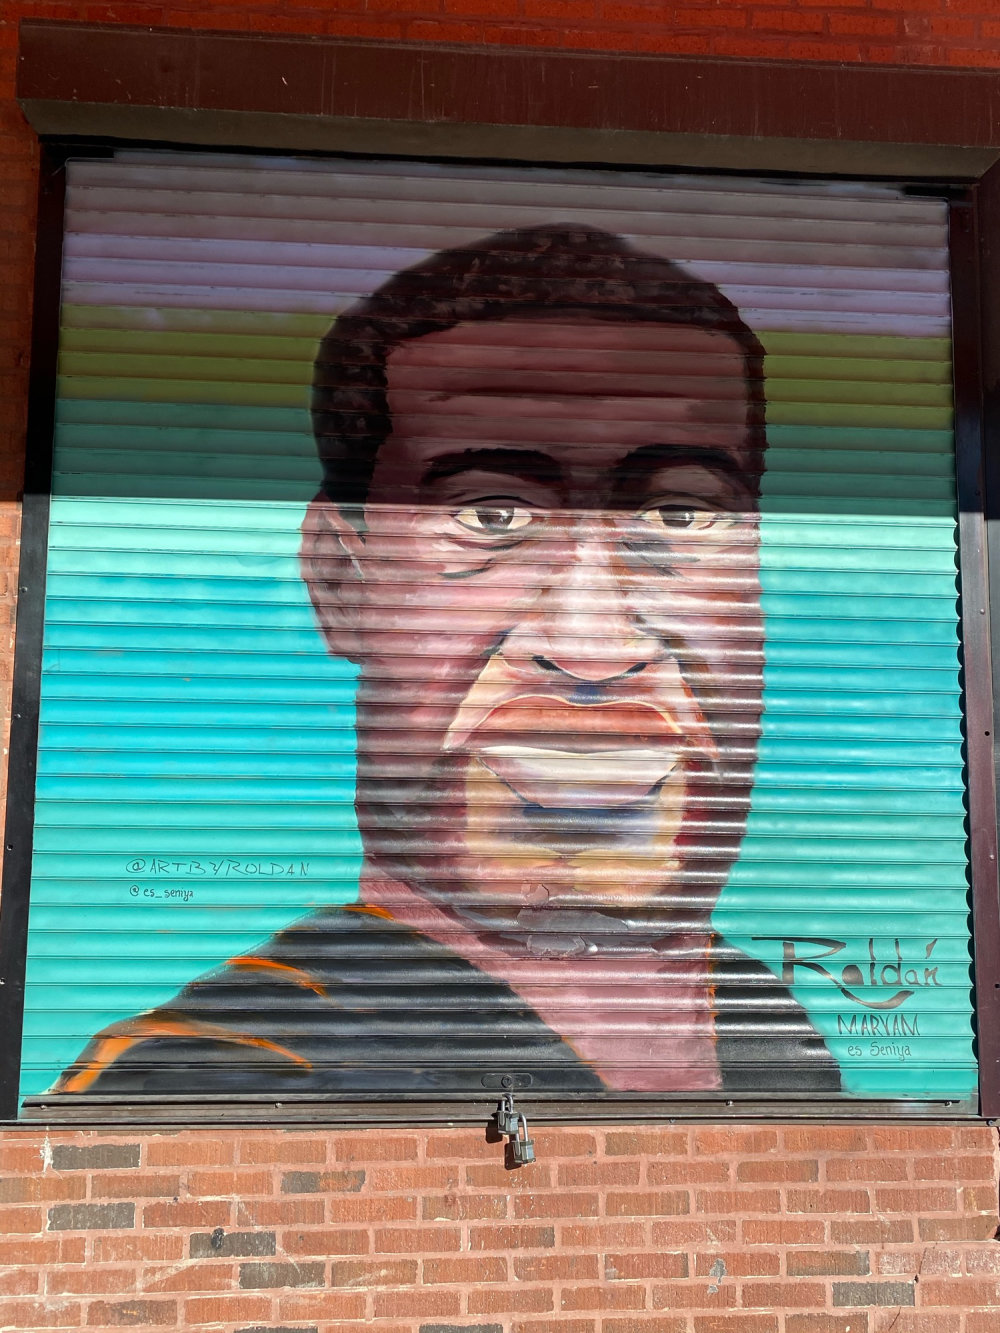 mural in Chicago by artist unknown. Tagged: George Floyd